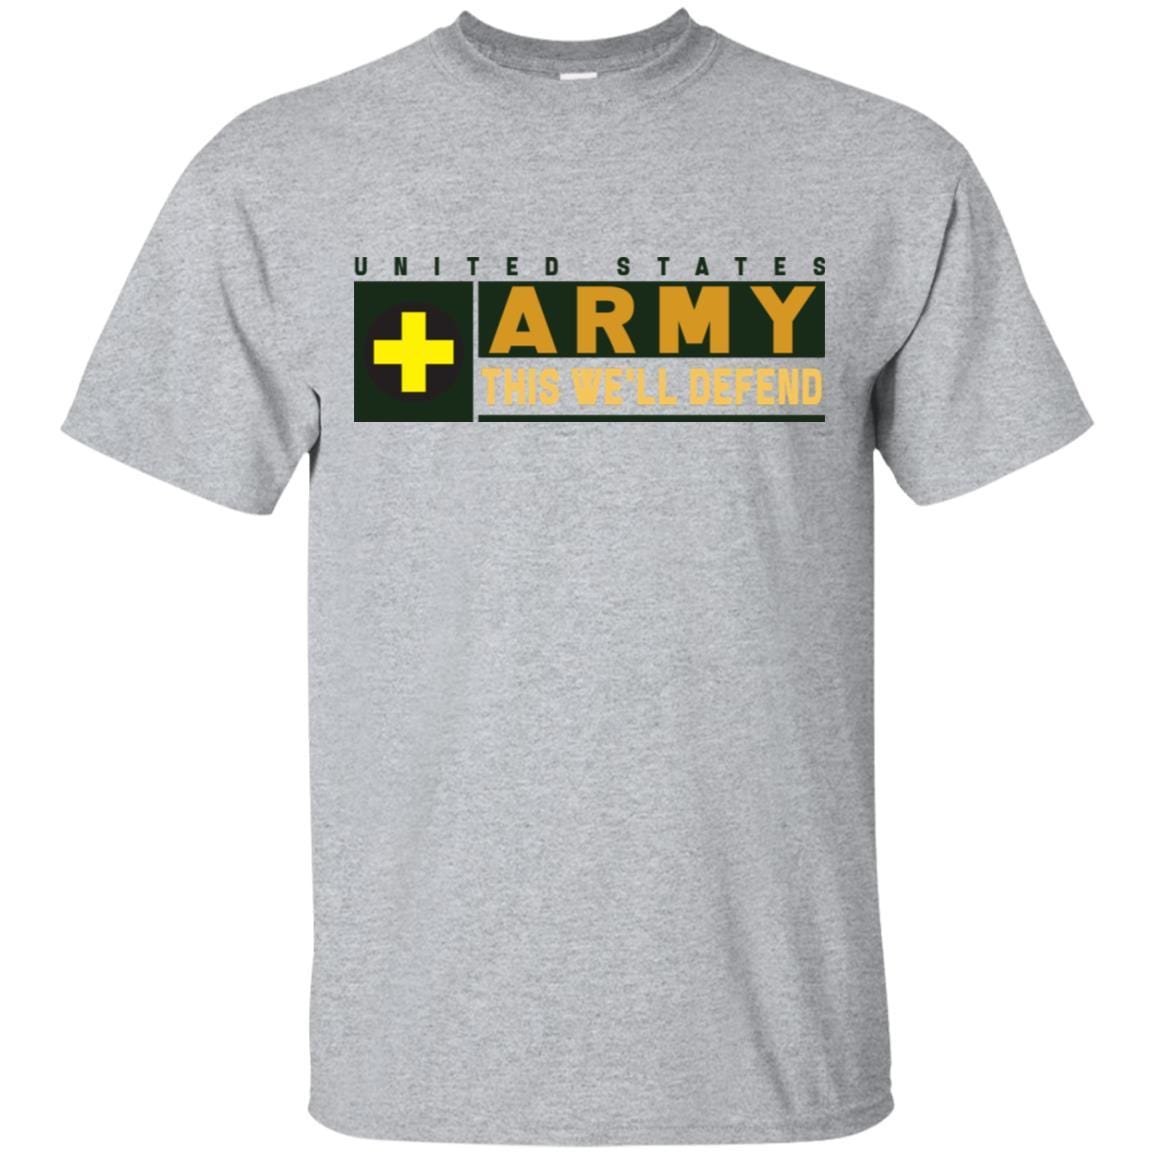 US Army 33RD INFANTRY BRIGADE COMBAT TEAM CSIB- This We'll Defend T-Shirt On Front For Men-TShirt-Army-Veterans Nation